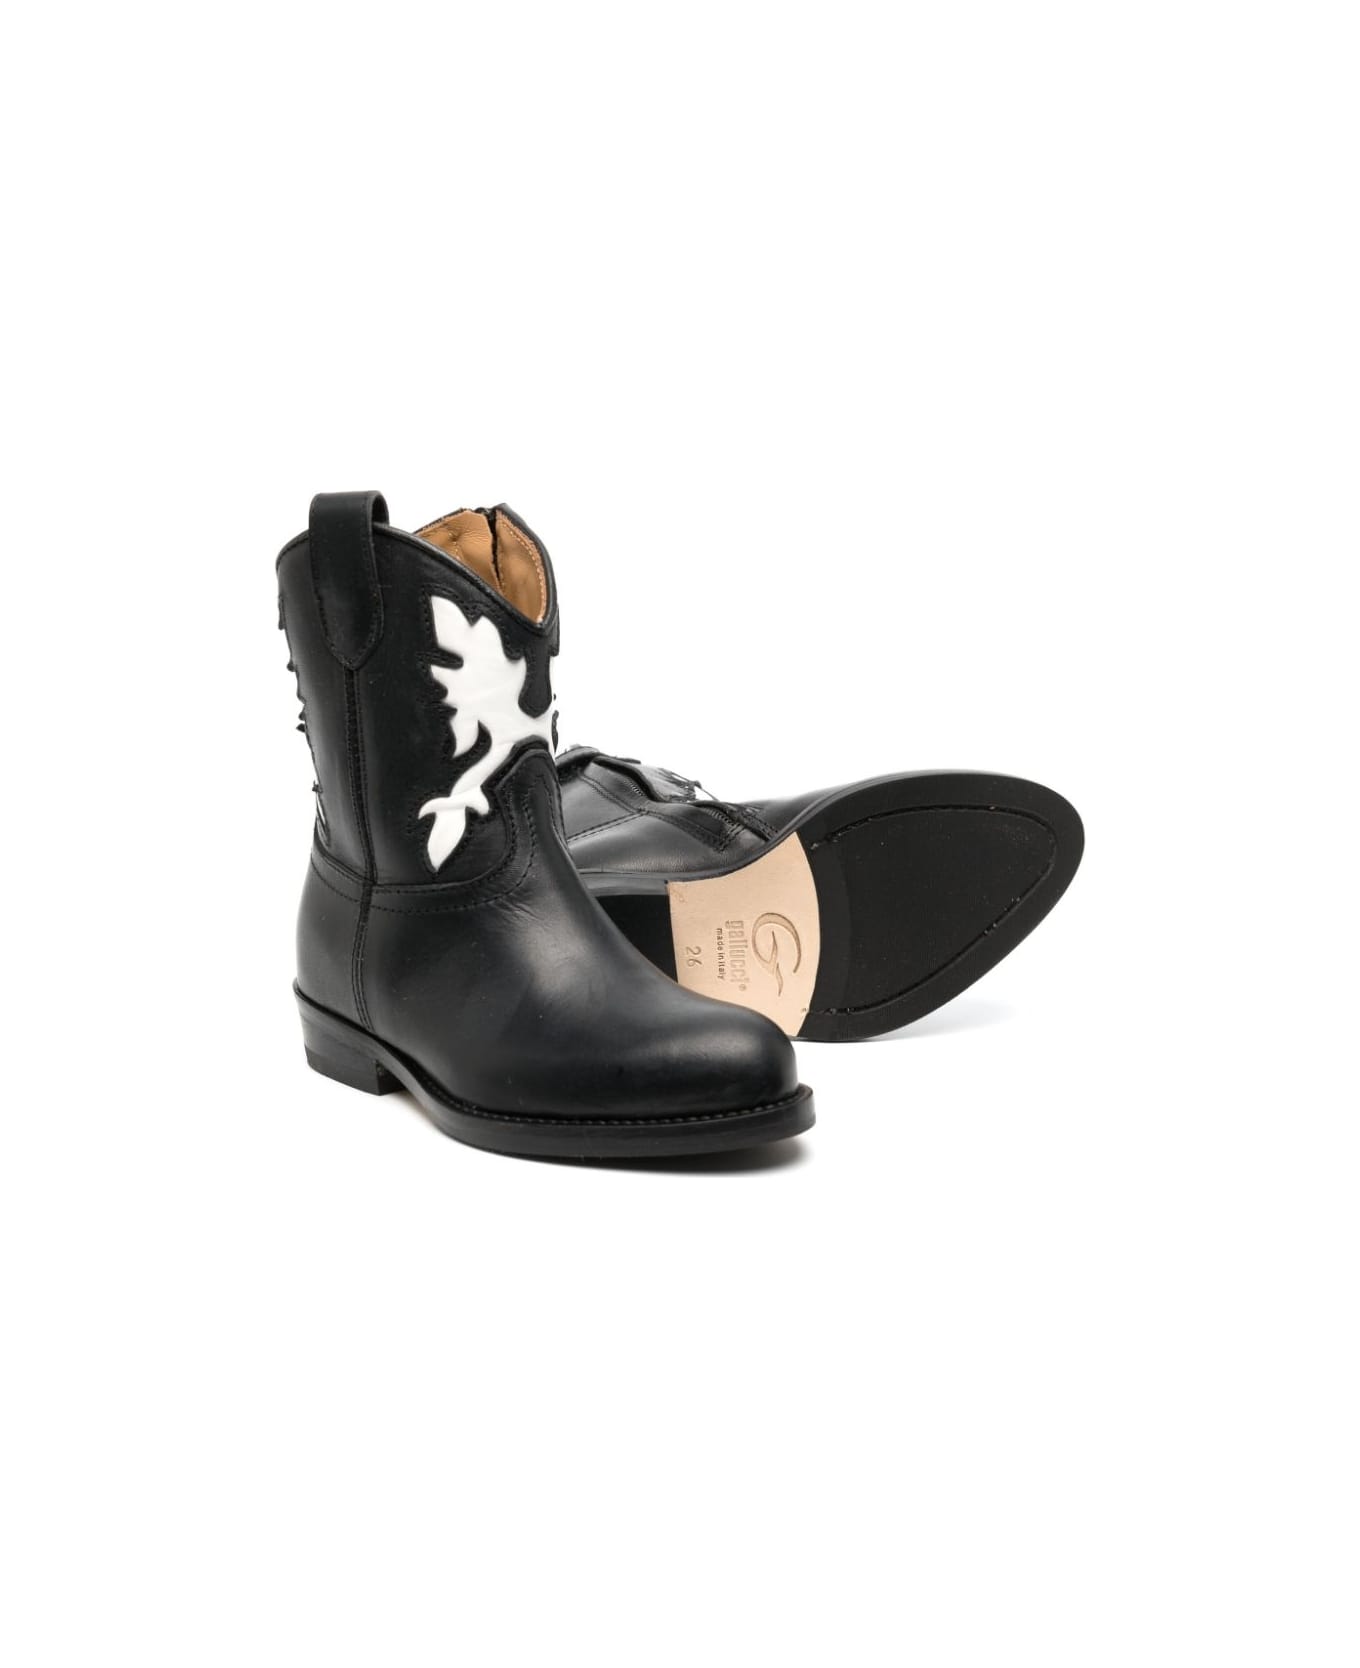 Gallucci Western Boots With Embroidery - Black